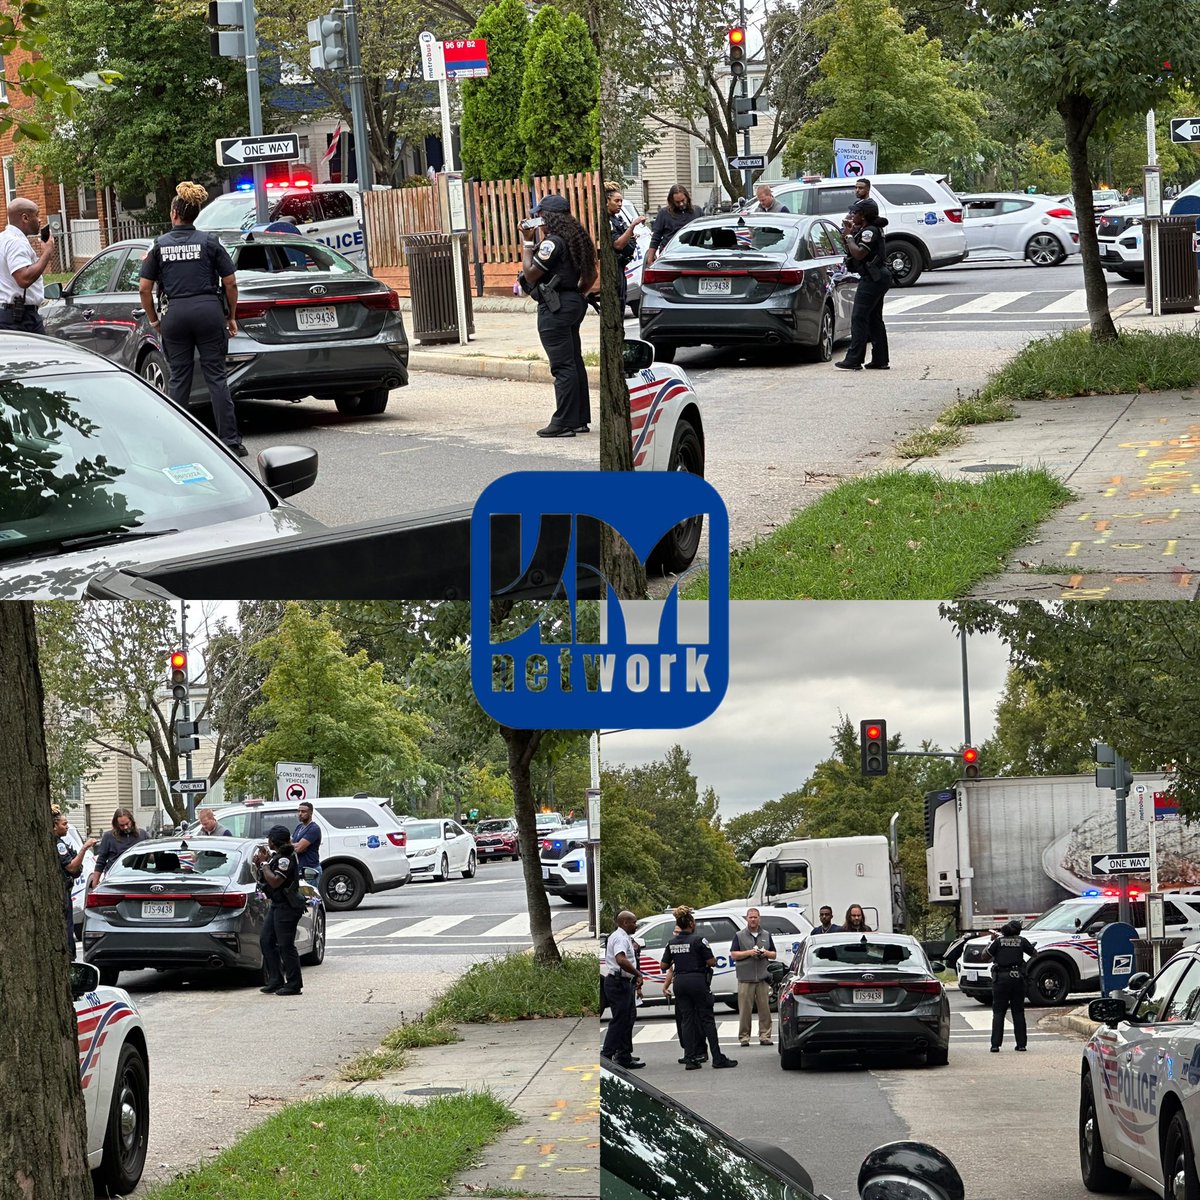 A gray Kia was involved in a shooting wast of the river around 1:30pm today. The two suspects then fled to 11th and Independence Ave SE where there were unsuccessful in carjacking a woman. They then proceeded to 18th & Independence where they carjacked a male for his blue Honda. Bullet holes were found inside the vehicle also a busted window and flat tire H/